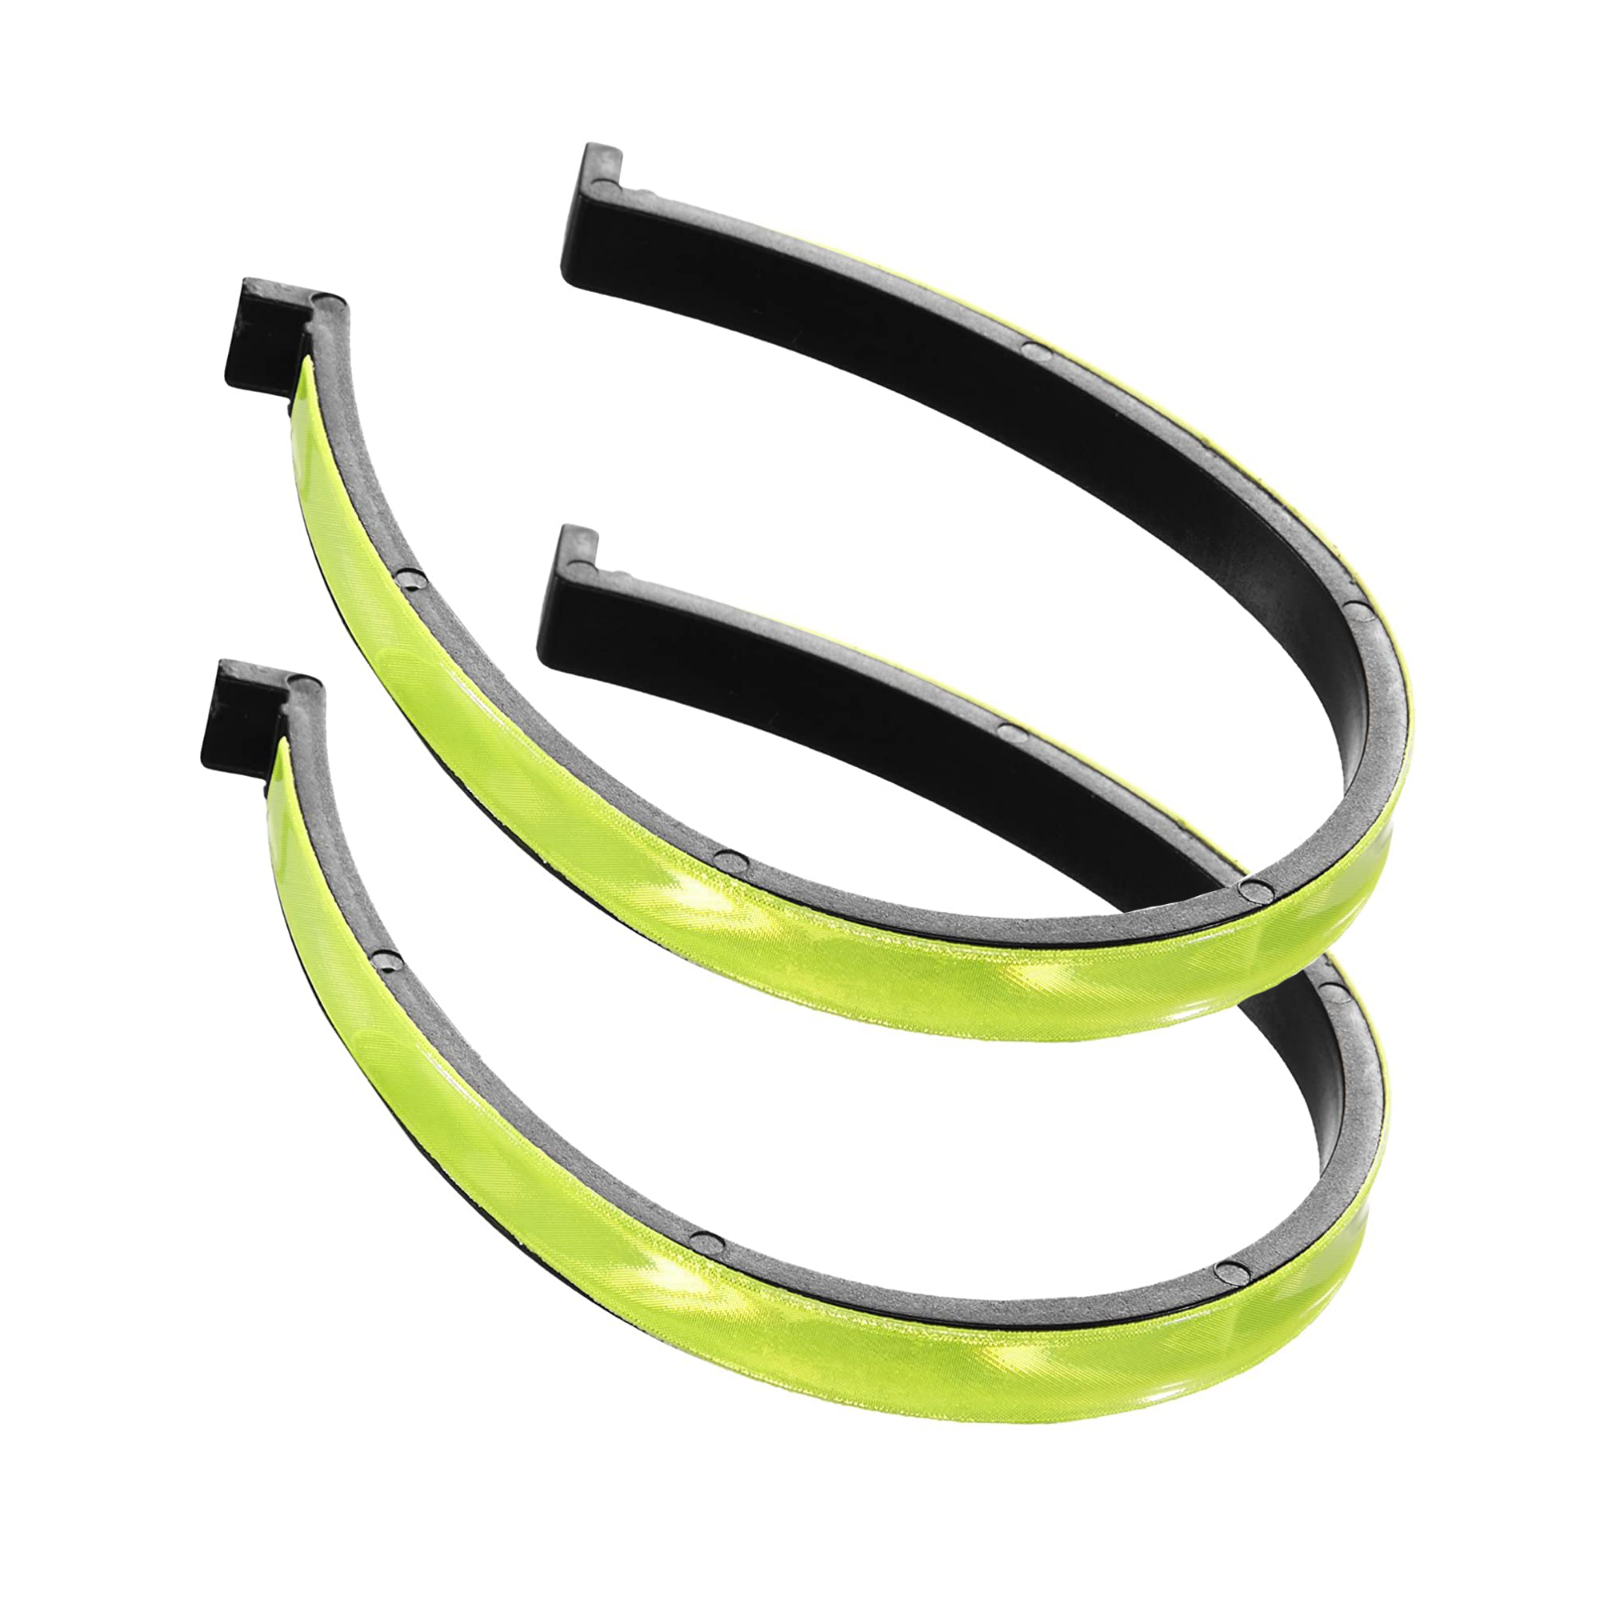 Wow Wow Reflective Trouser Clips - For Winter Running / Cycle Safety - Sportandleisure.com (6967981375642)